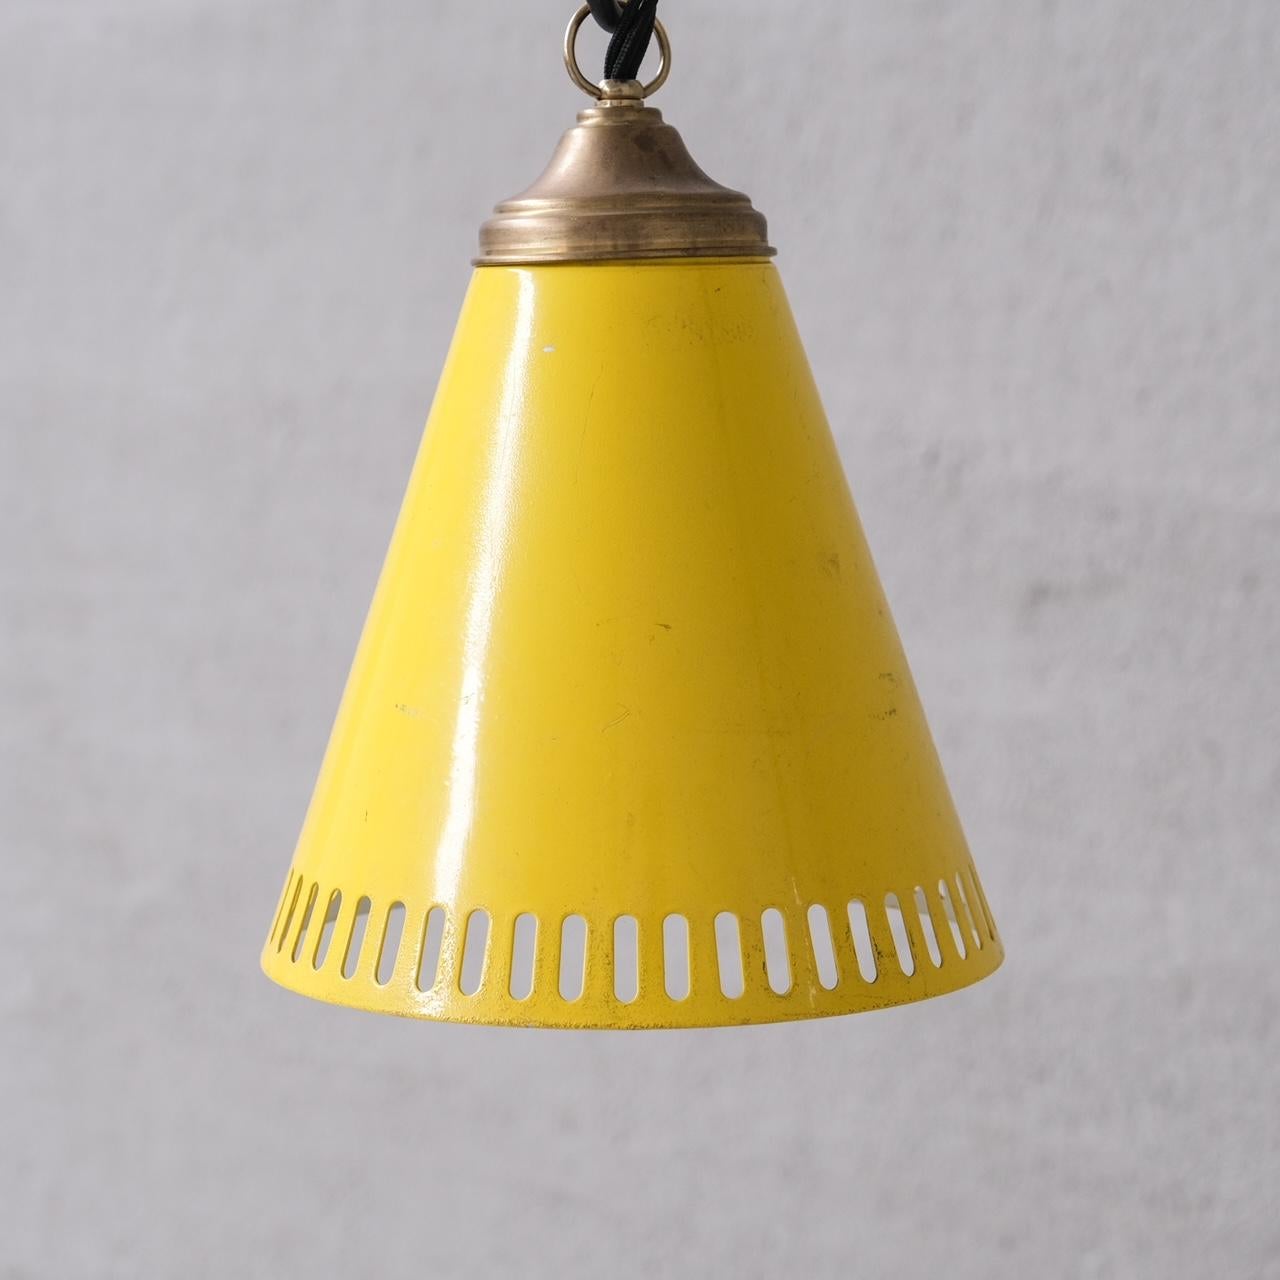 Italian New Old Stock Mid-Century Metal Pendant Shade Lights (6 available) For Sale